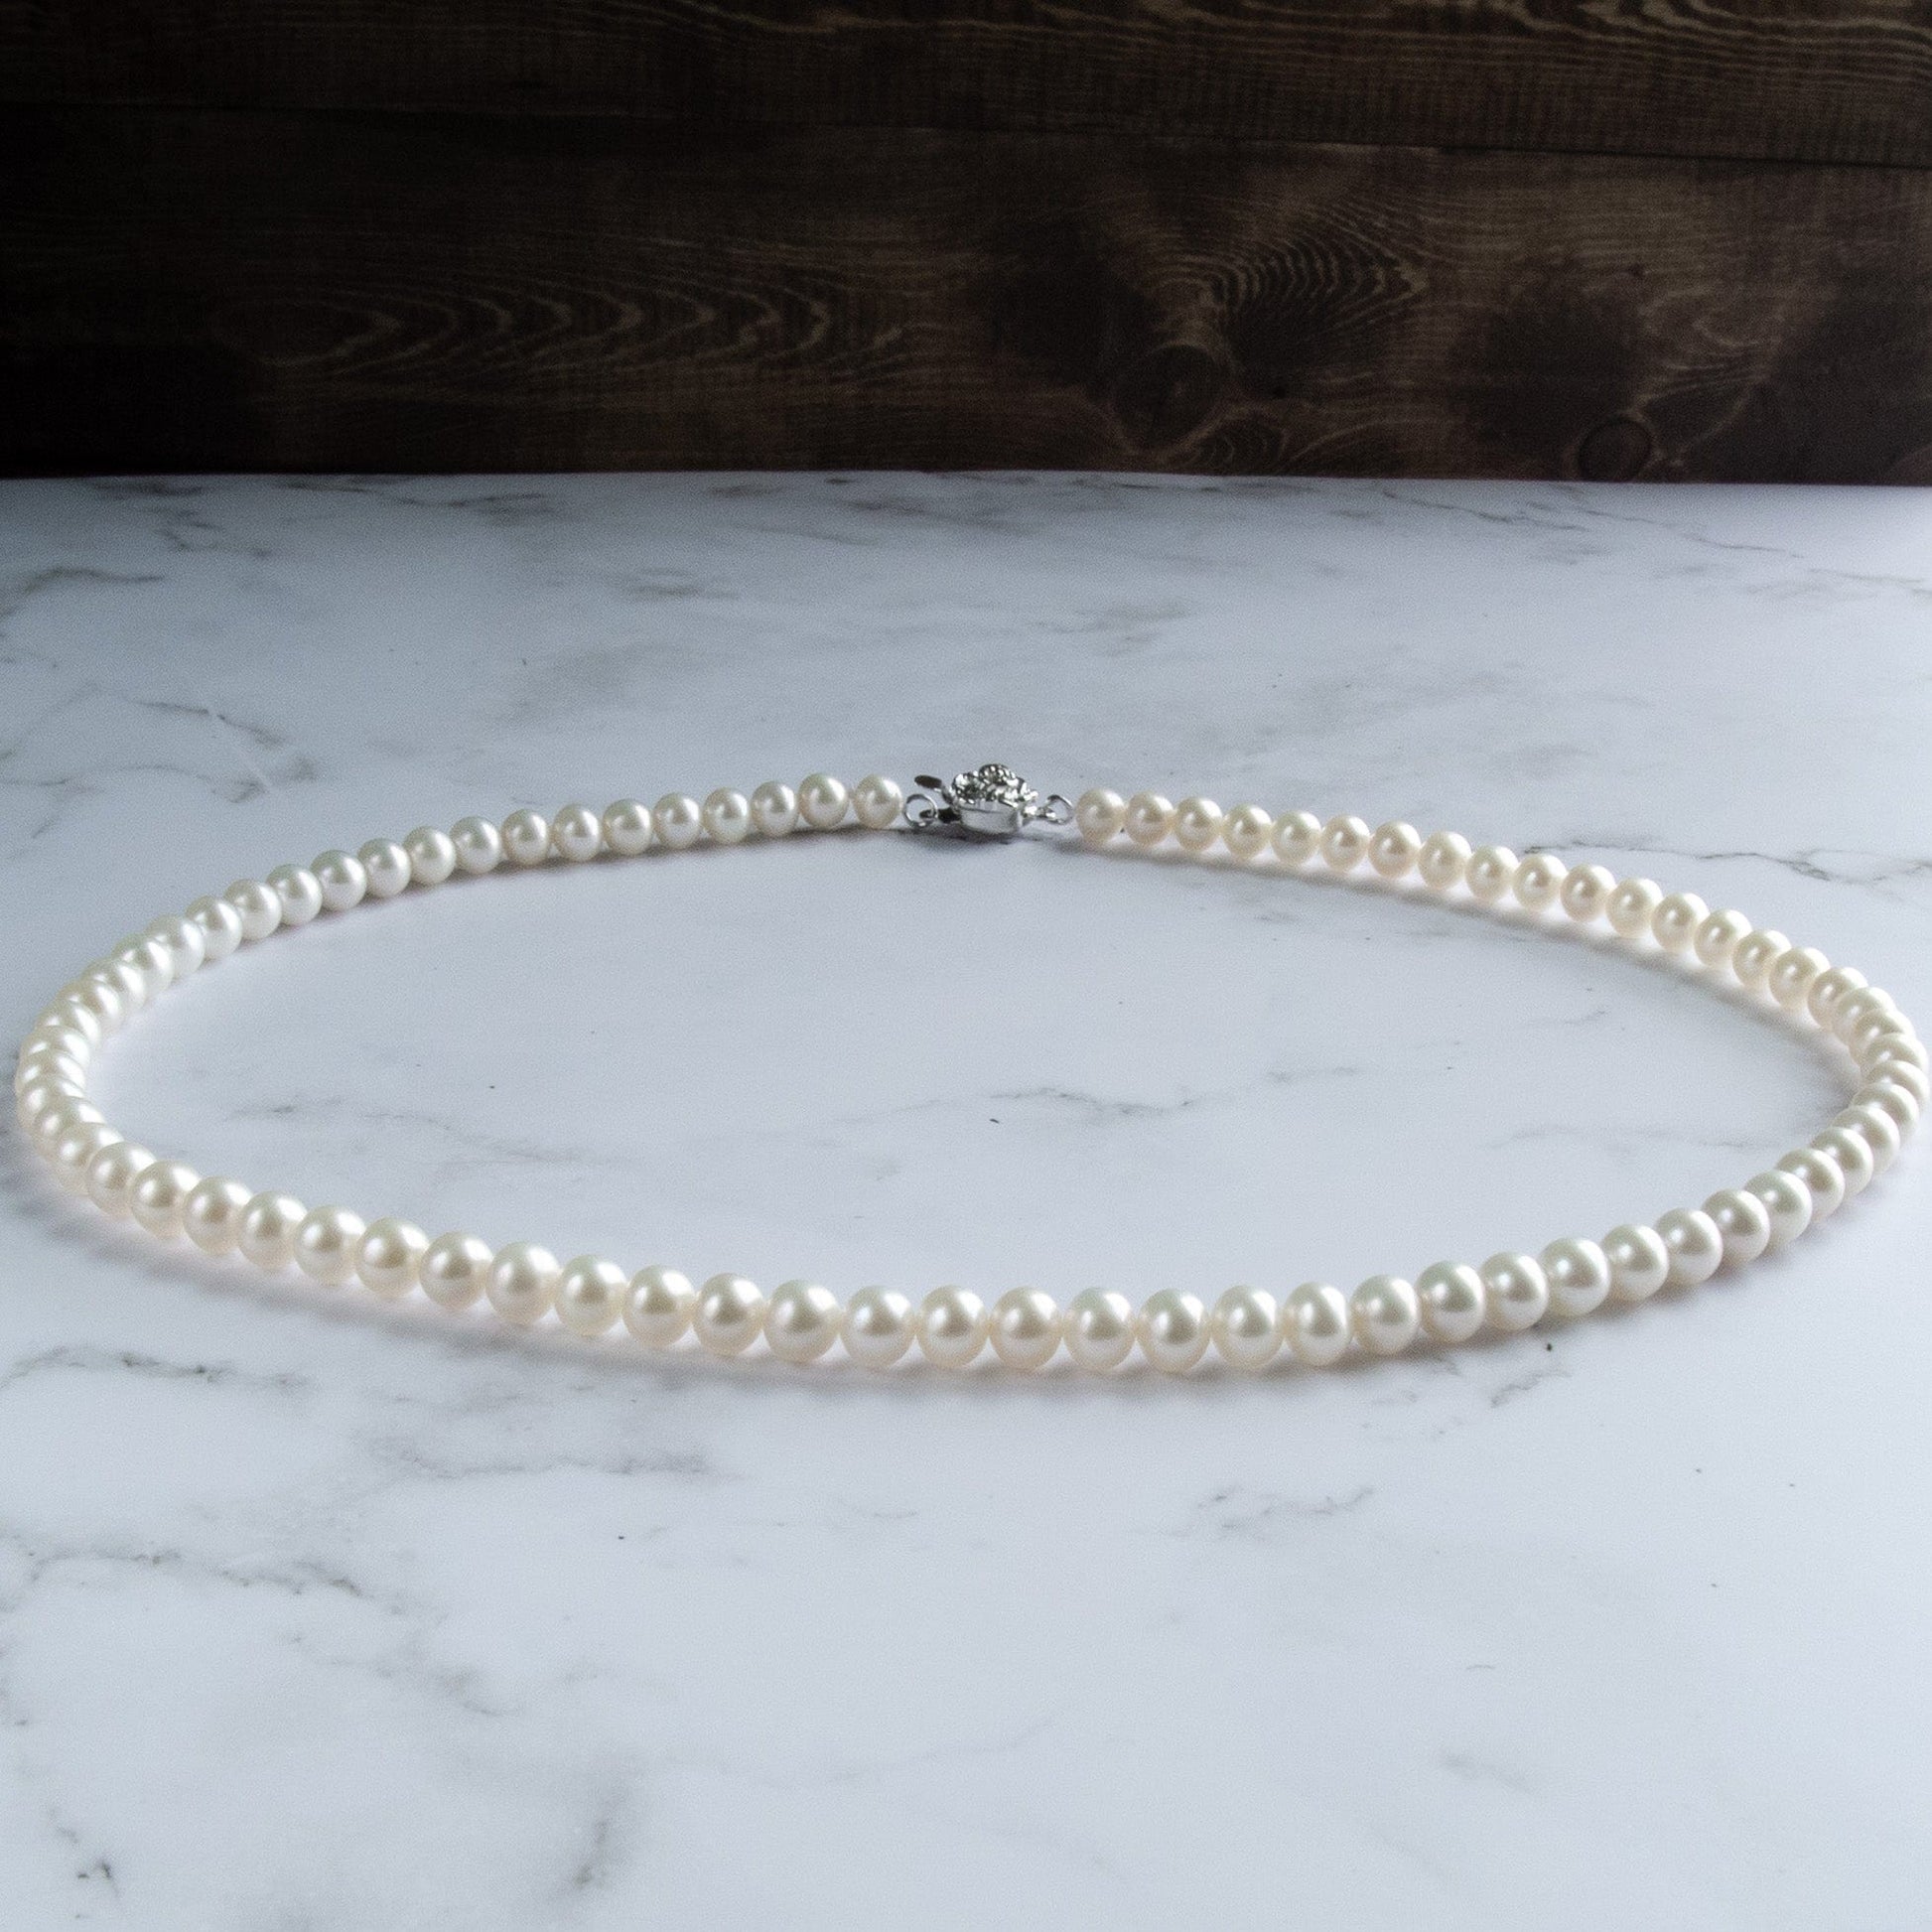 Arbor Trading Post Necklaces Genuine Cultured Freshwater White Pearl Classic Pearl Strand Necklace, 925 Sterling Silver Rose Design Clasp, 16 Inch Long, 6-7mm Pearls